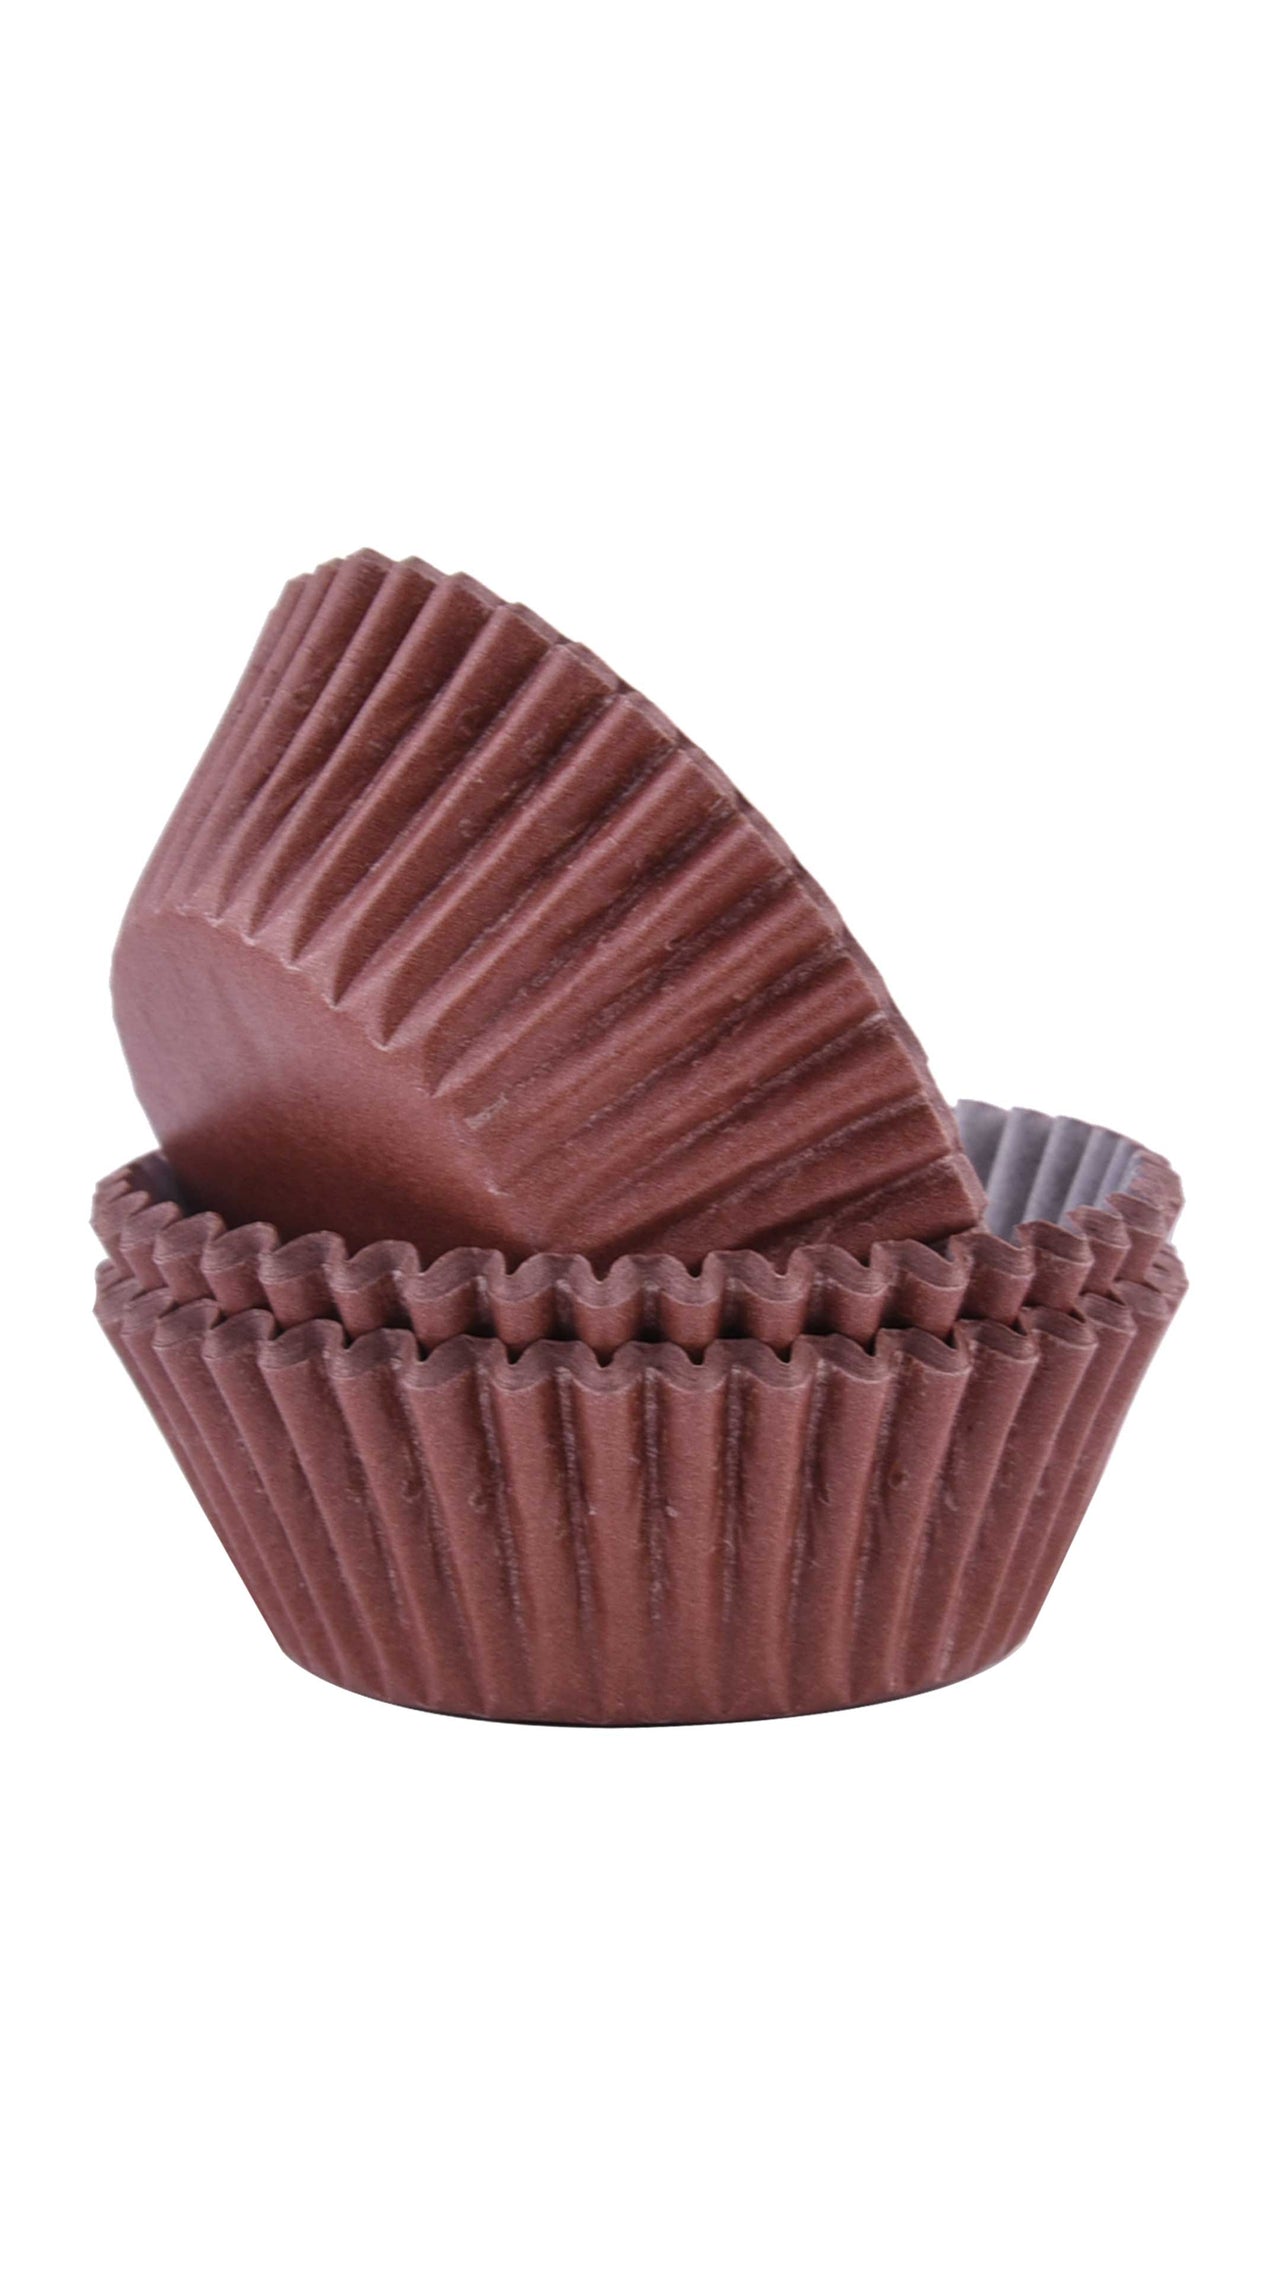 PME - Cupcake Cases - Chocolate - 60 Pack Cupcake Cases PME